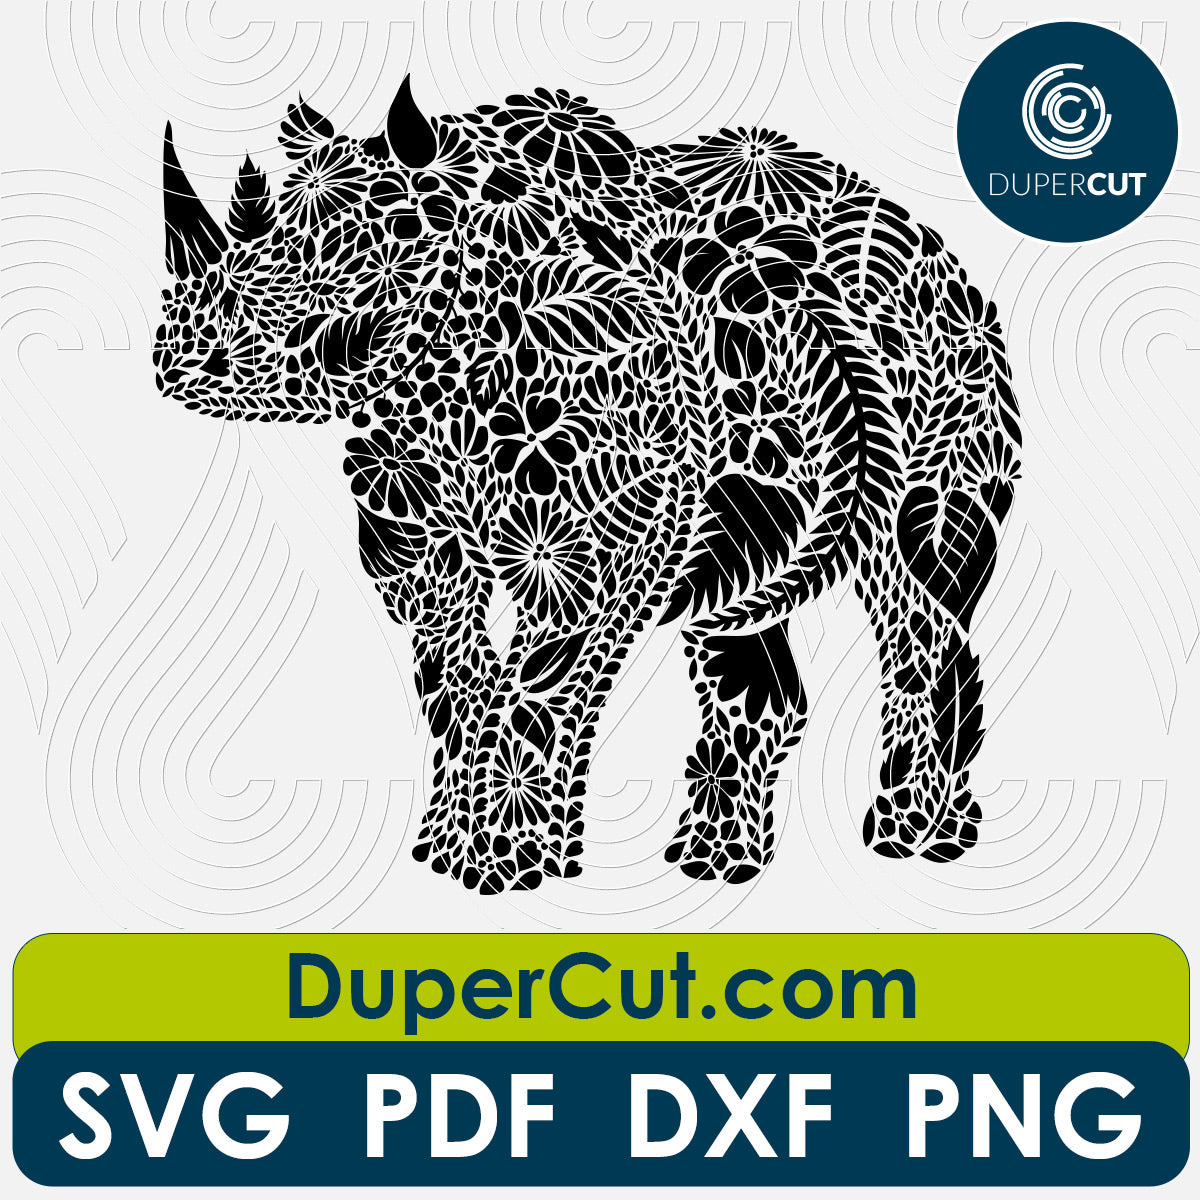 Rhinoceros black detailed stencil. SVG PNG DXF cutting files for Cricut, Silhouette, Glowforge, print on demand, sublimation templates